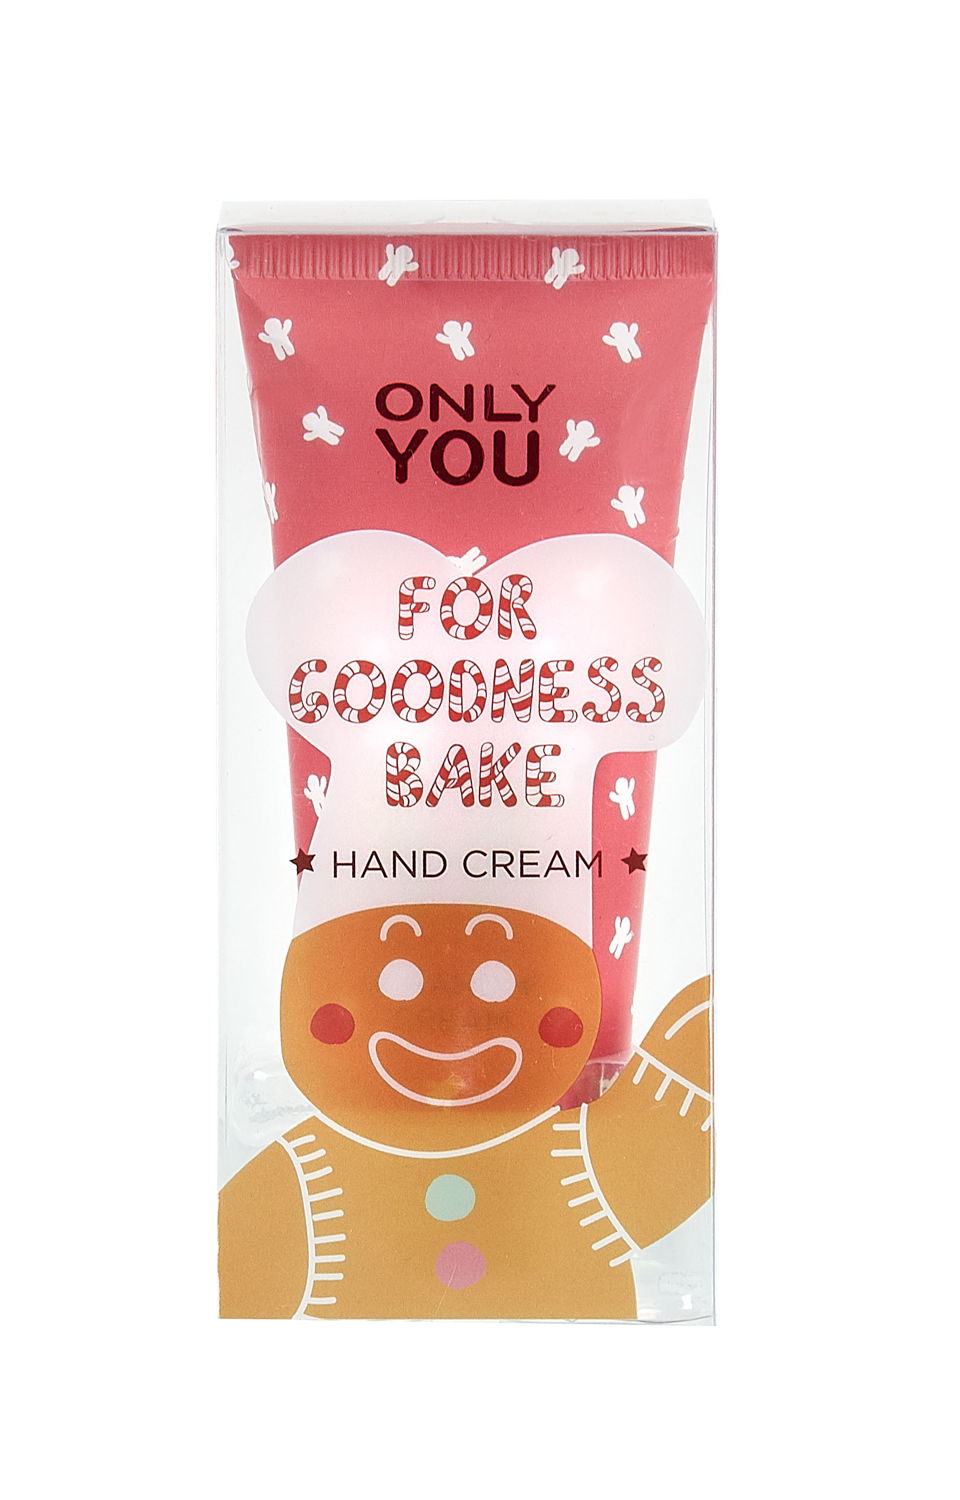 ONLY YOU - For Goodness Bake Hand Cream